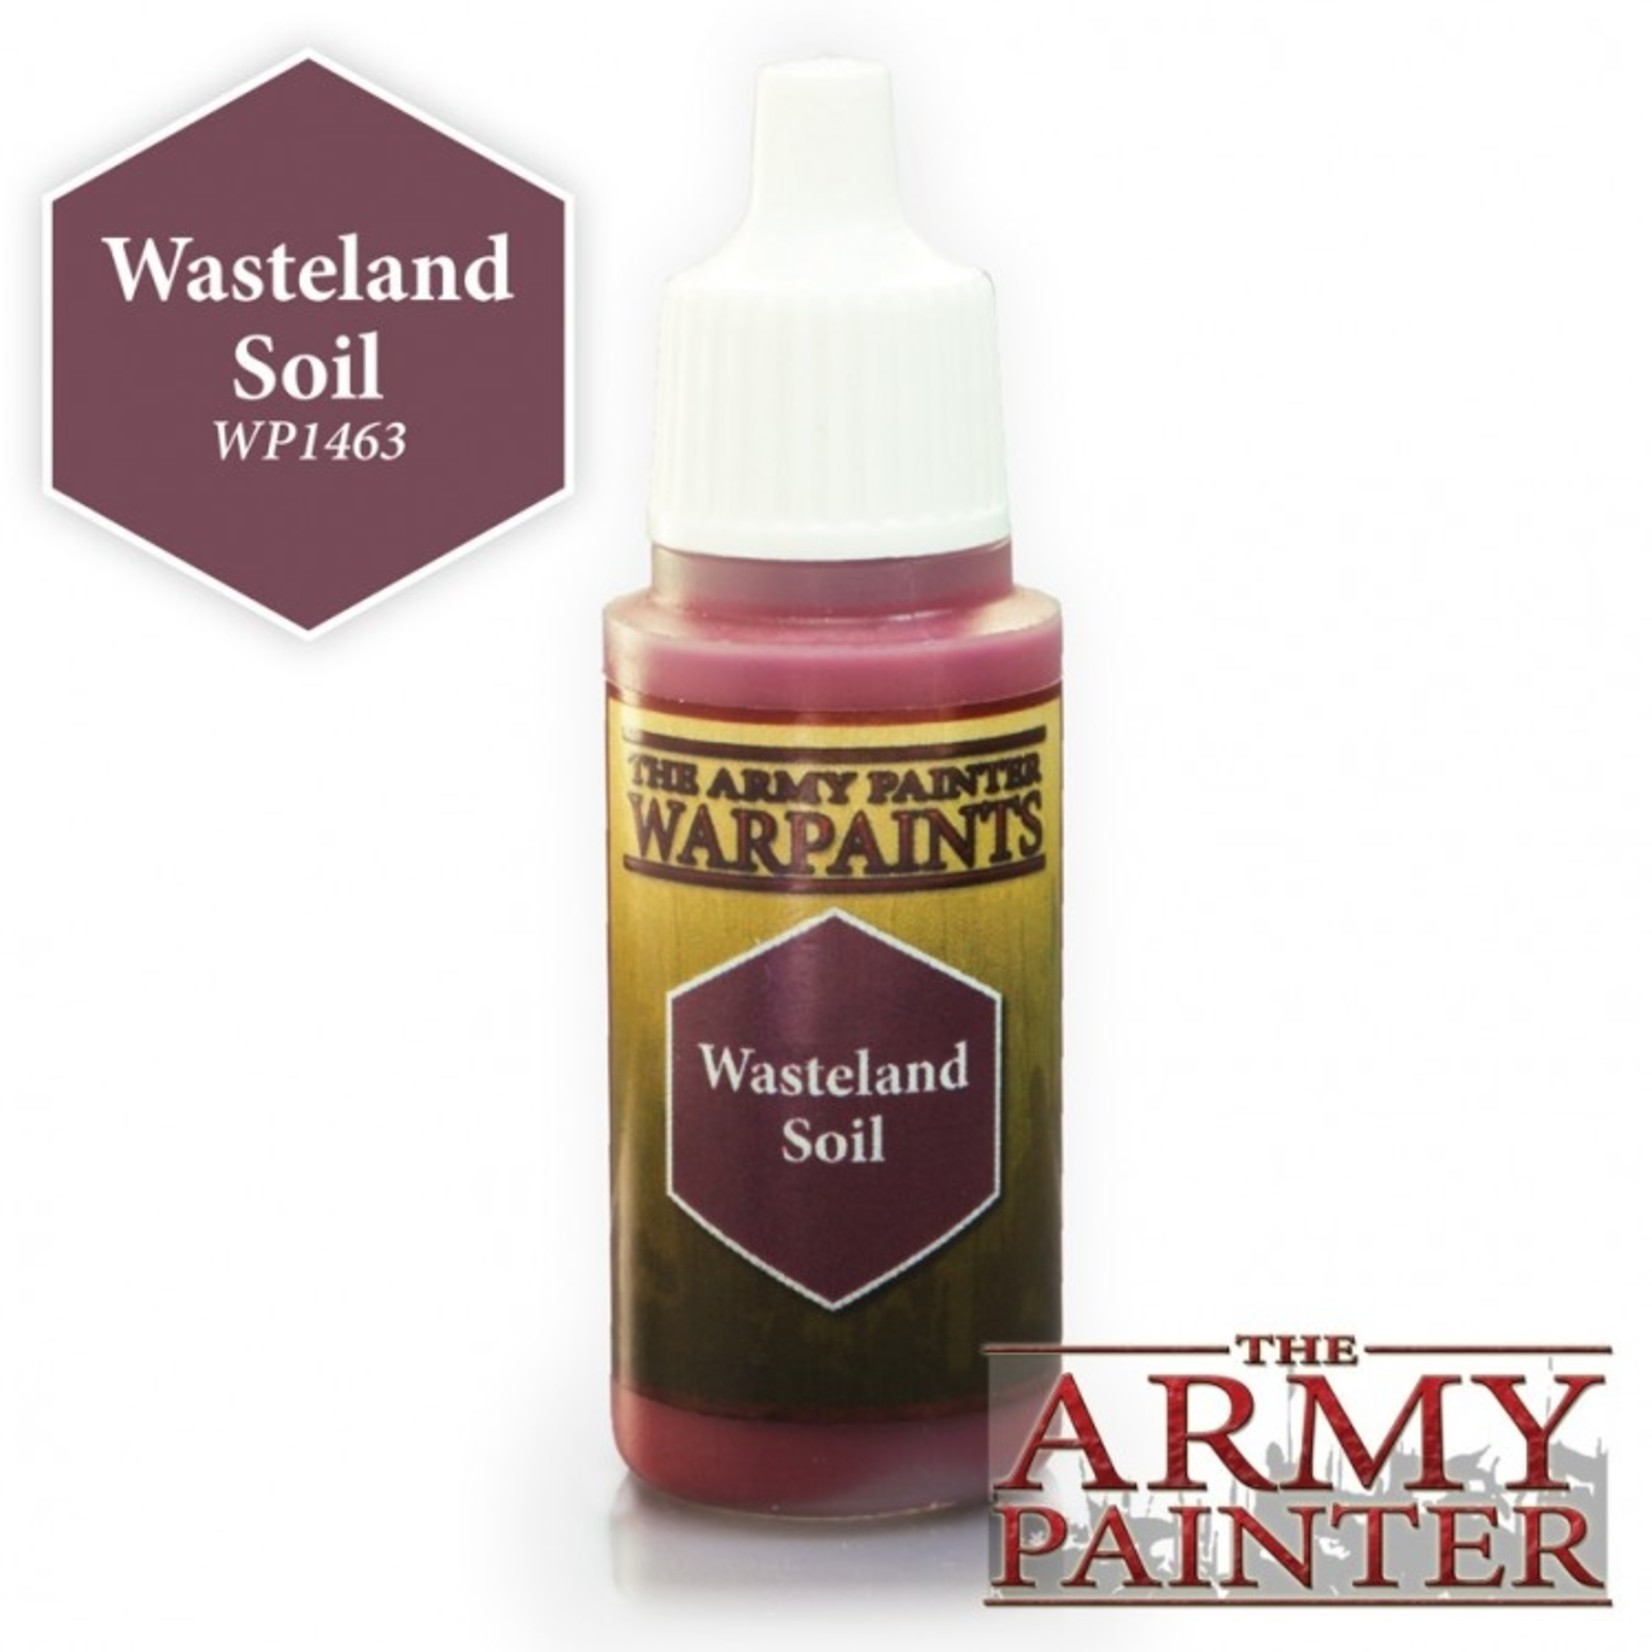 The Army Painter The Army Painter Wasteland Soil 18ml